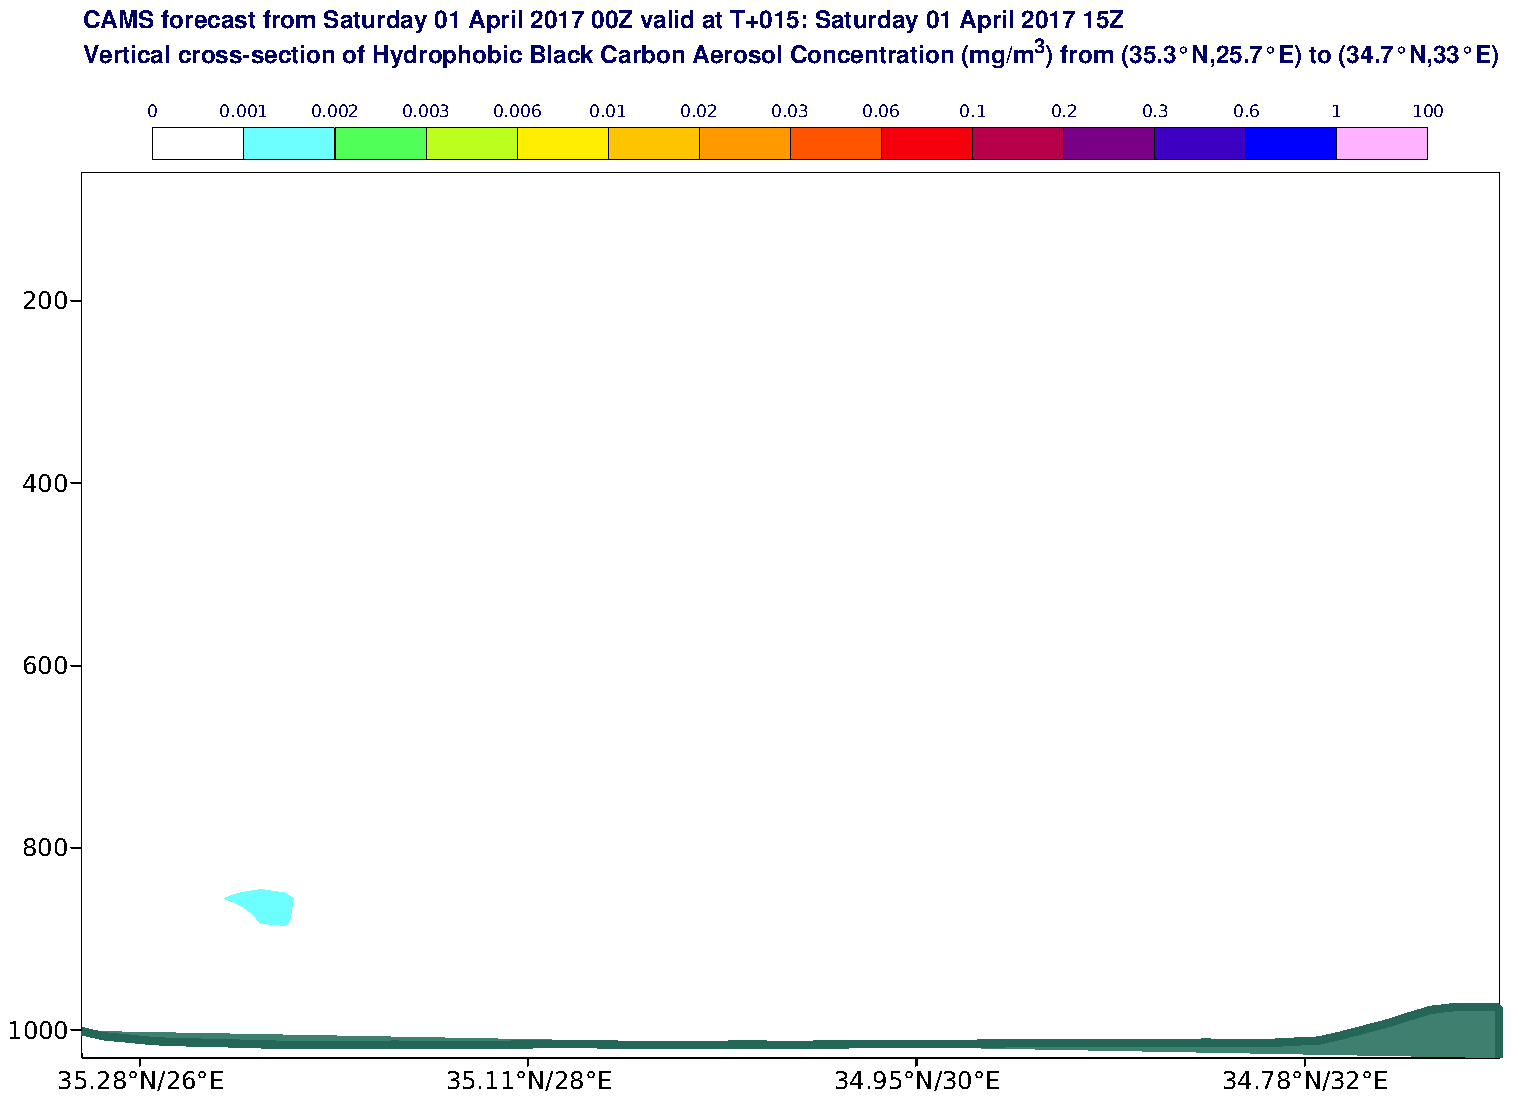 Vertical cross-section of Hydrophobic Black Carbon Aerosol Concentration (mg/m3) valid at T15 - 2017-04-01 15:00